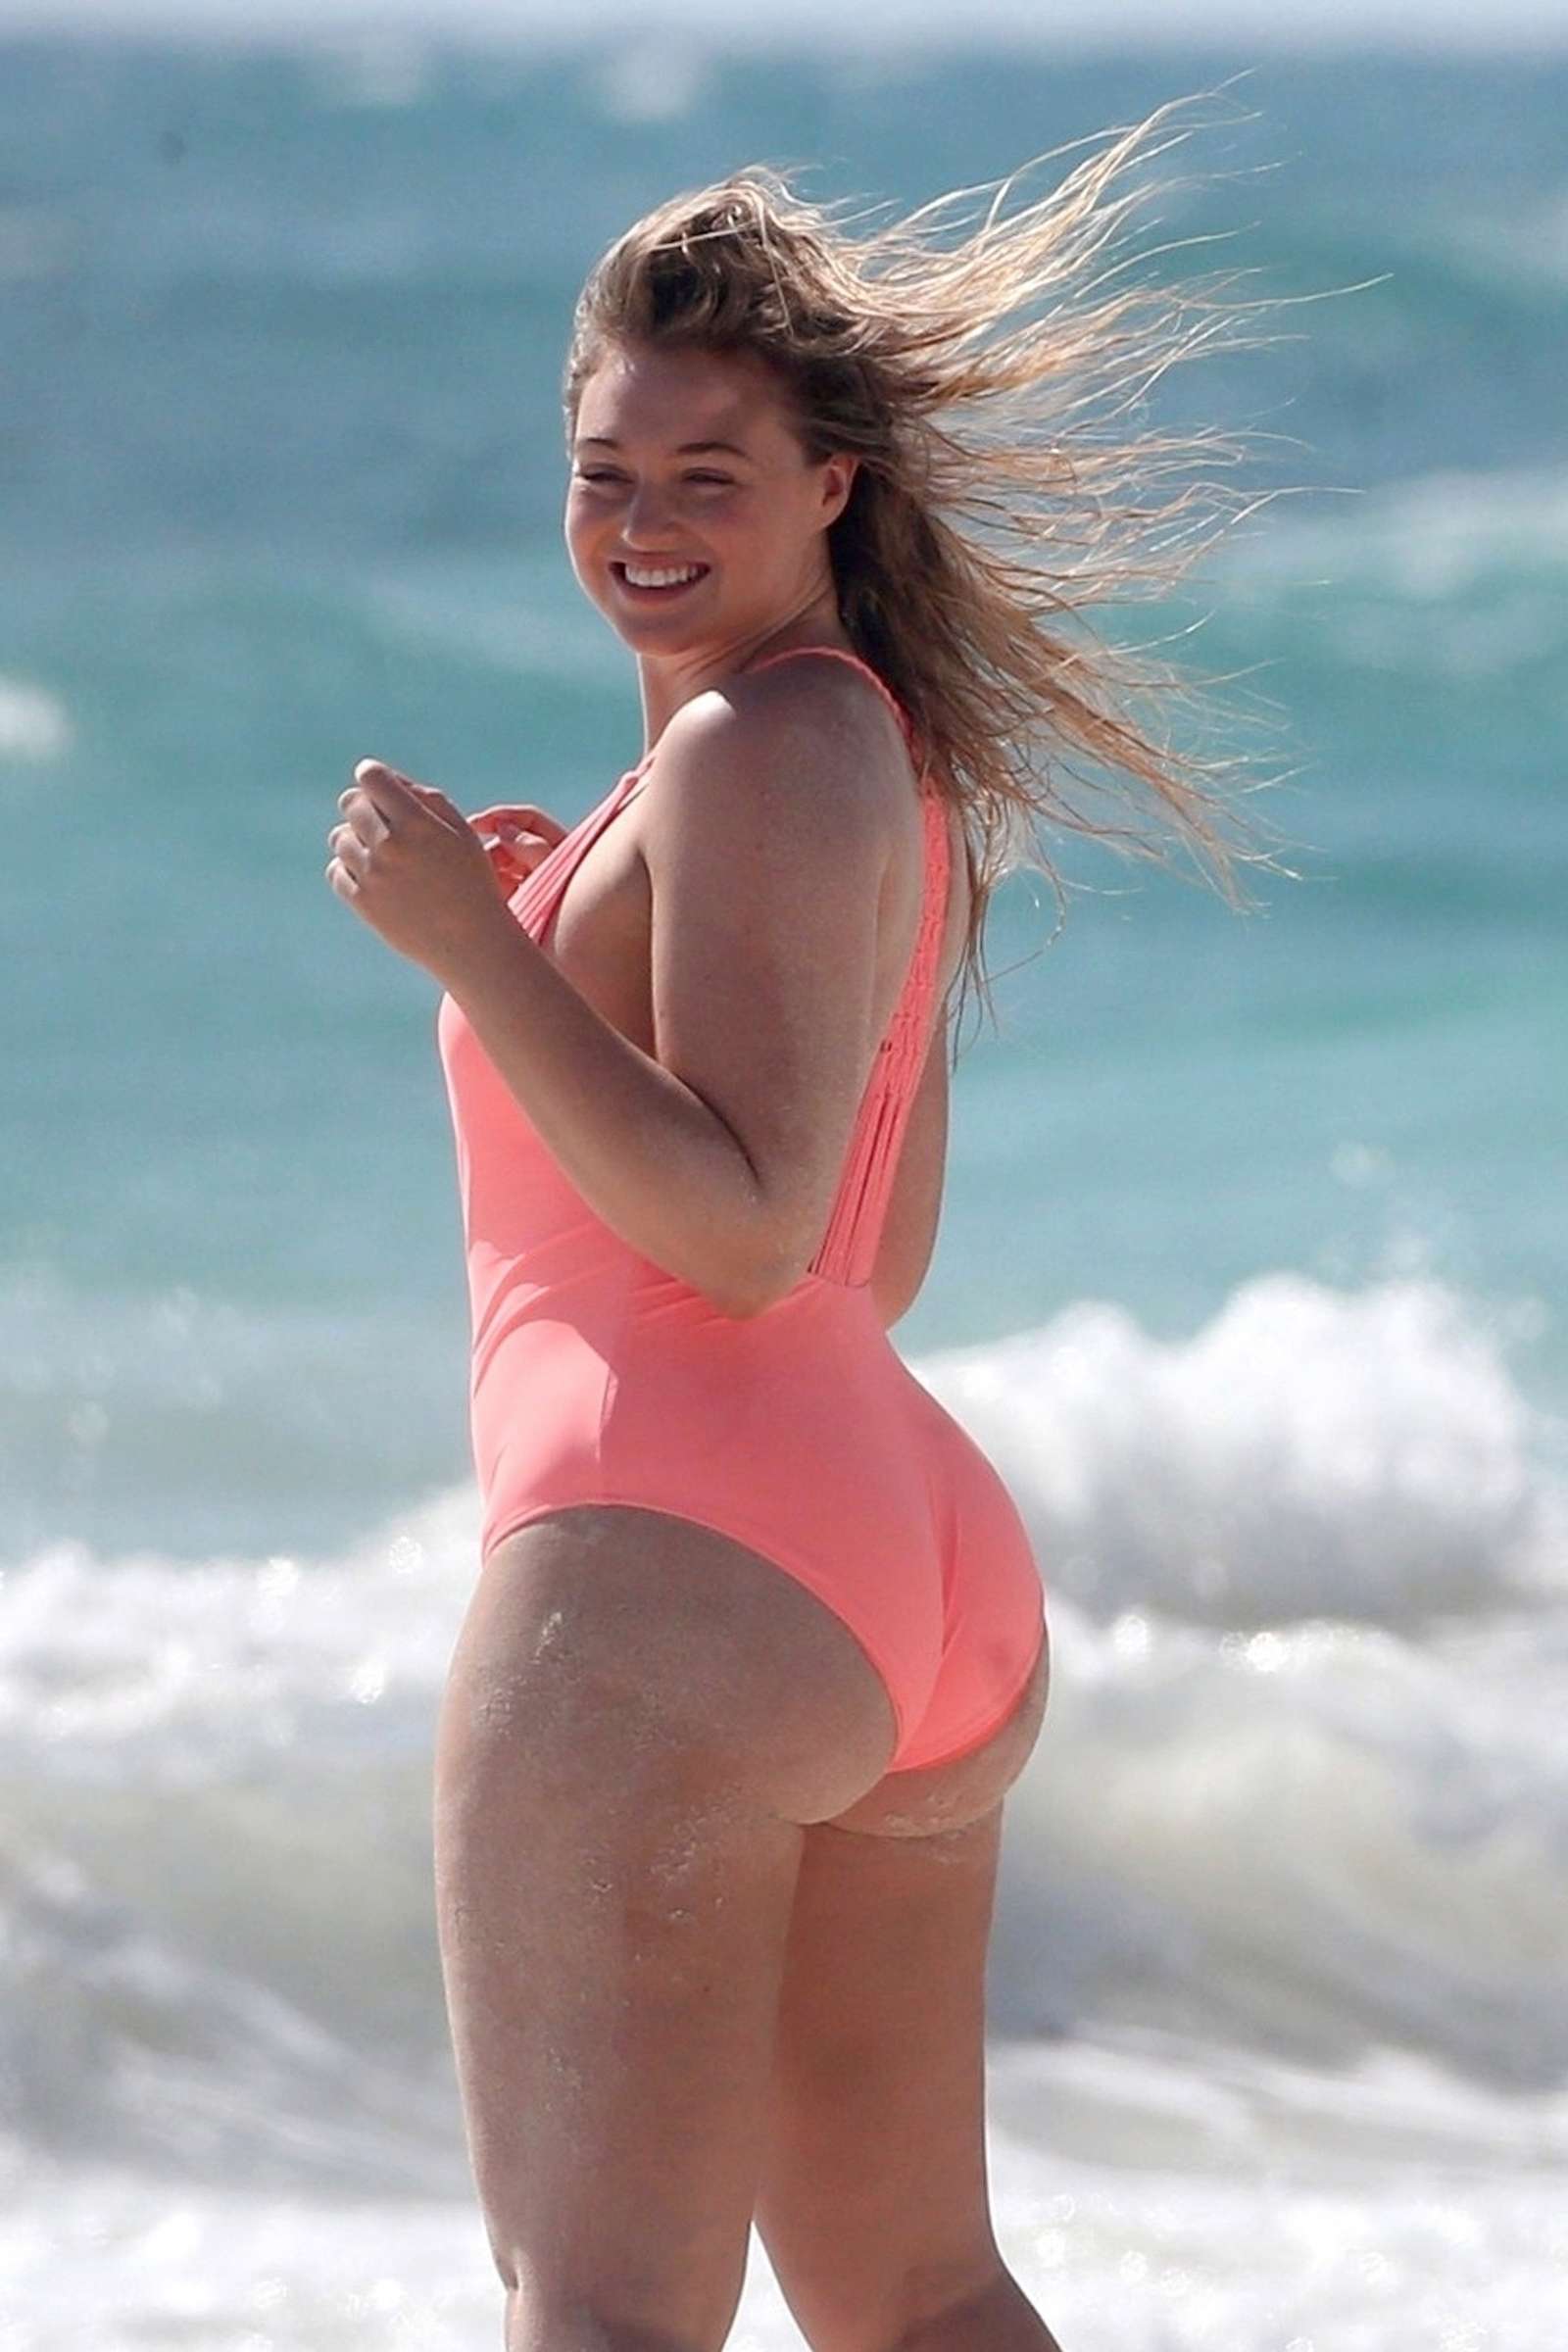 Iskra Lawrence 2018 : Iskra Lawrence in Bikini and Swimsuit: Aerie Photoshoot 2018 -27